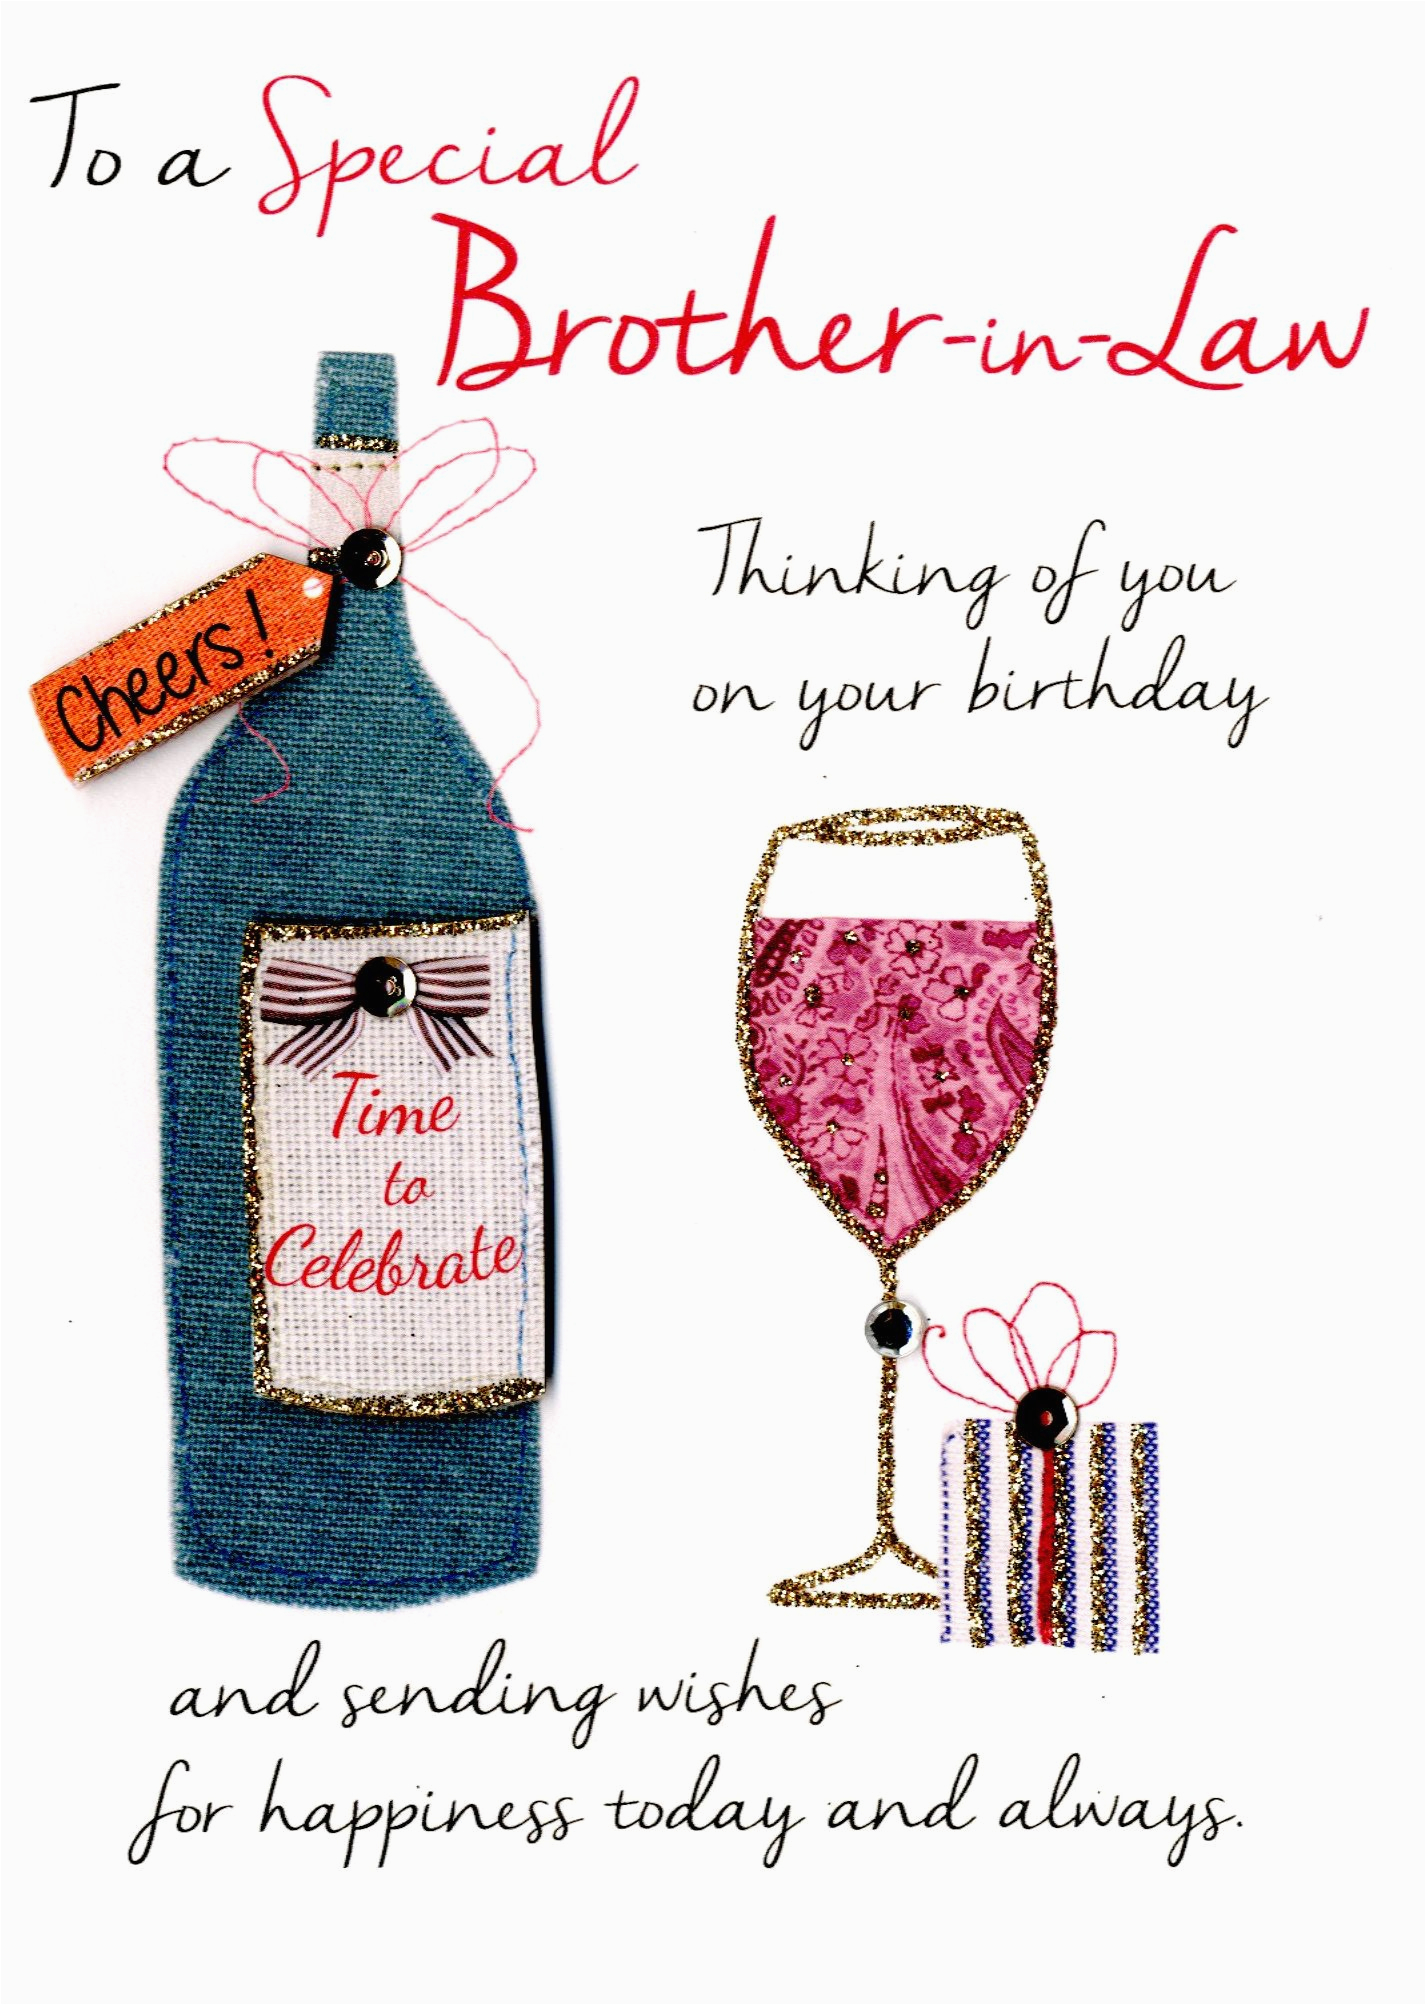 Birthday Cards for Brother In Law Free Special Brother In Law Birthday Greeting Card Cards